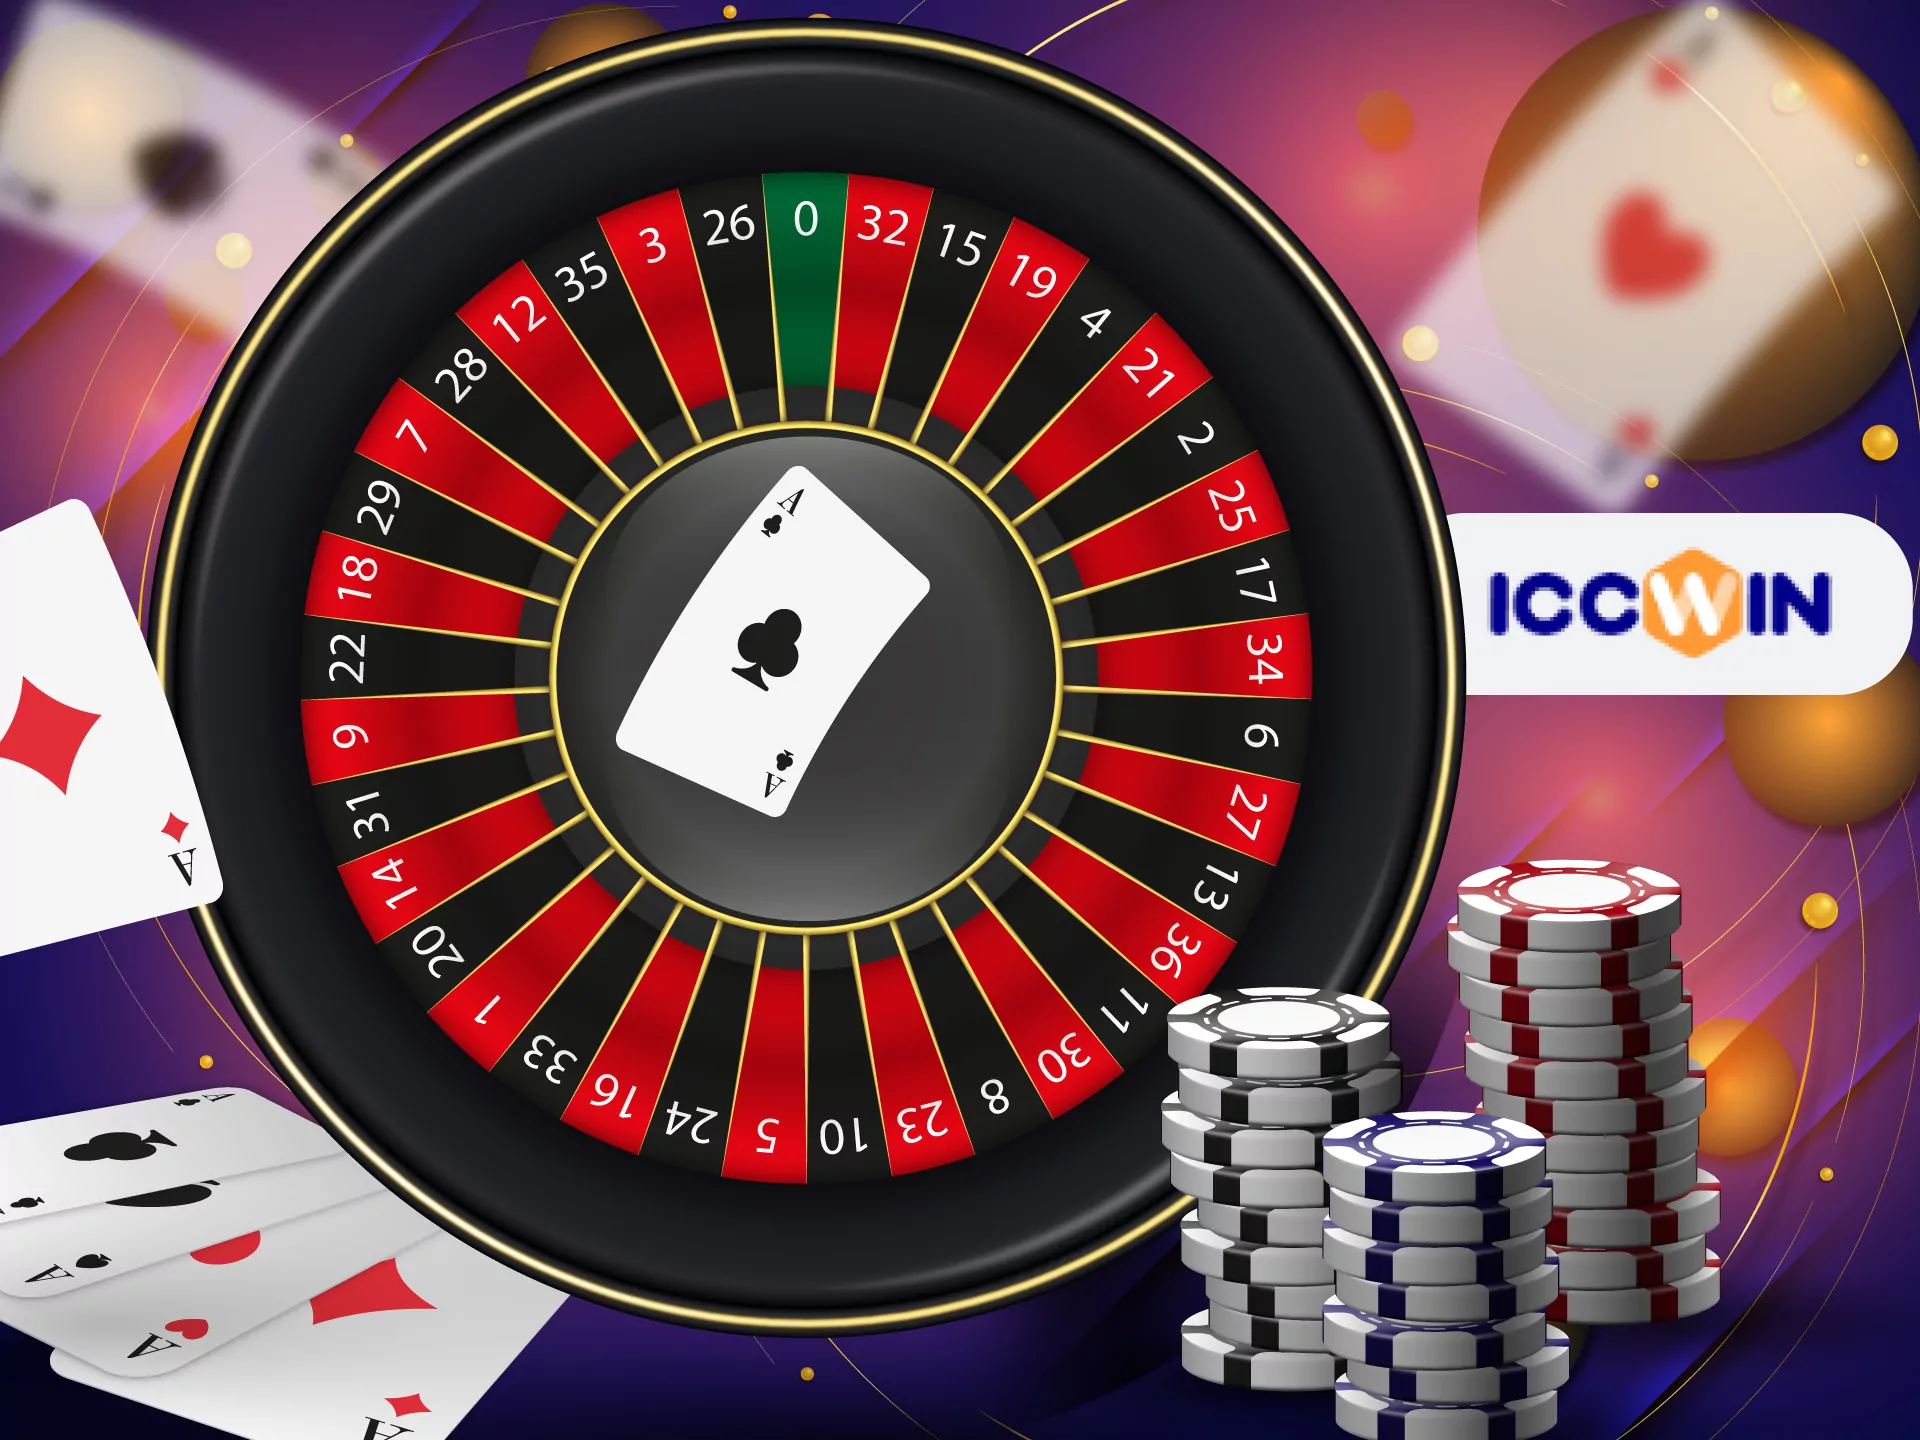 Play the most popular roulette games at ICCWIN.